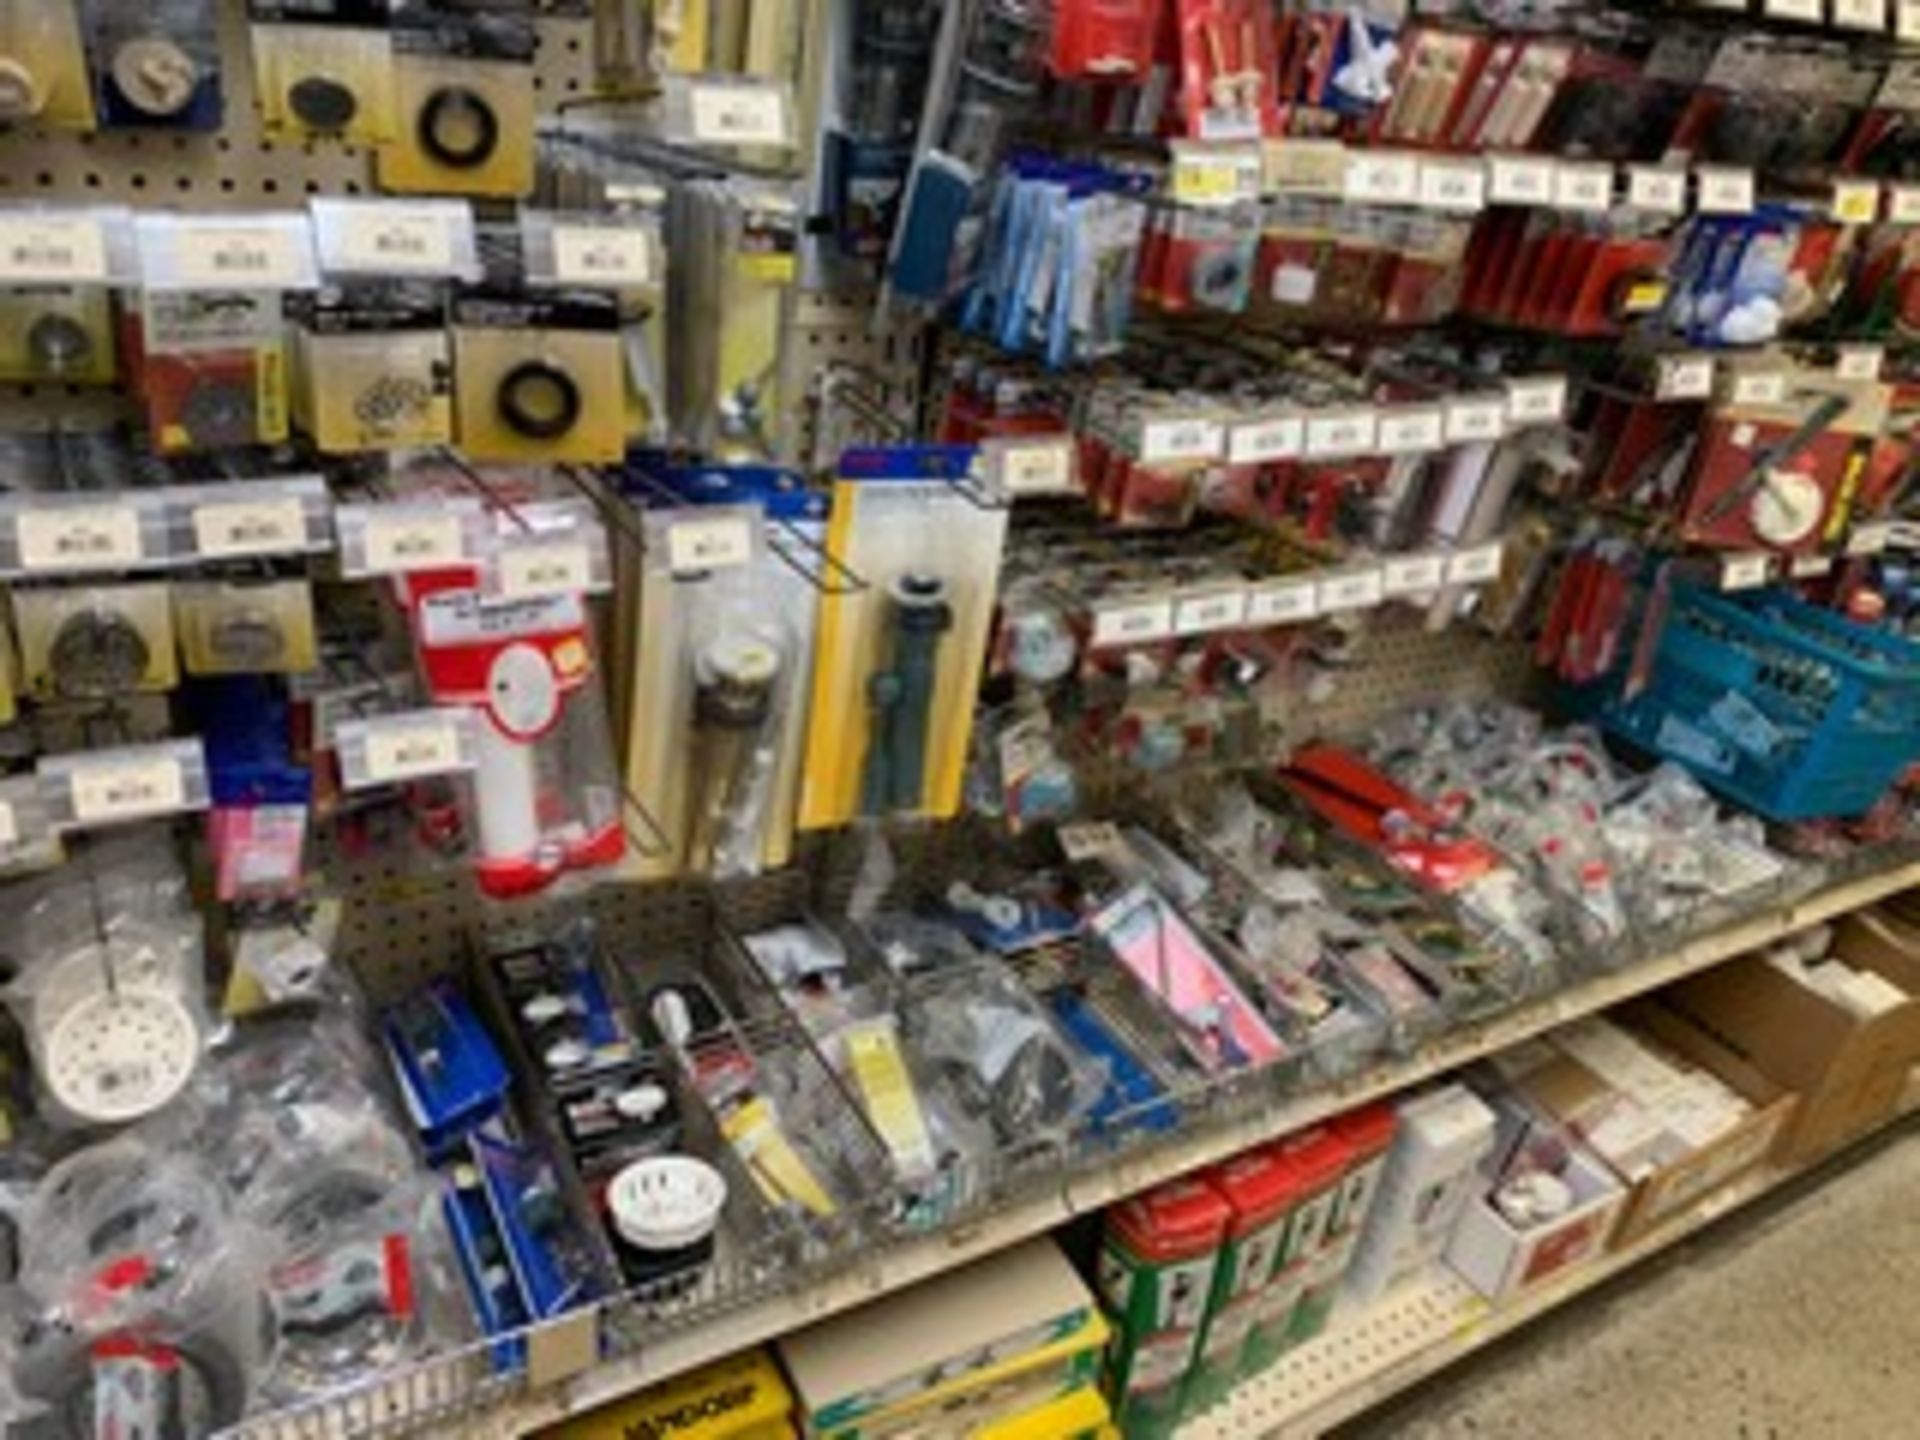 ASSORTED PLUMBING HARDWARE, HOSES, BALL COCKS, NOZZLES, FLAPPERS, CAPS, ETC - Image 2 of 4